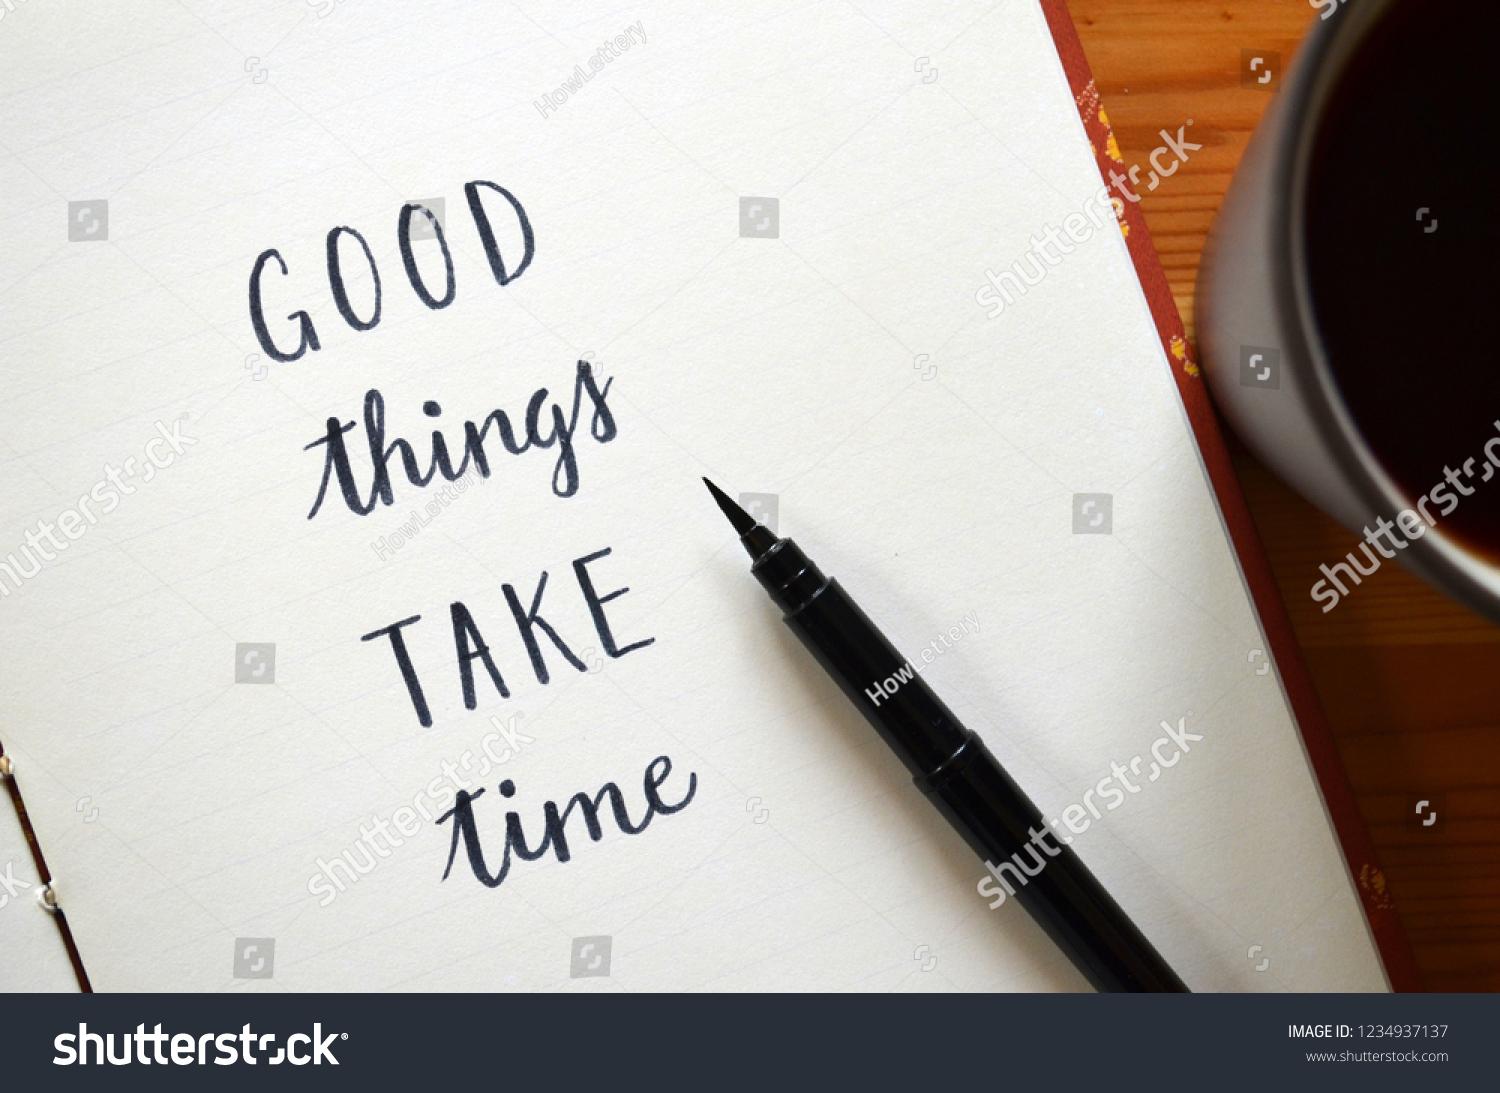 GOOD THINGS TAKE TIME written in notepad on desk with cup of coffee #1234937137